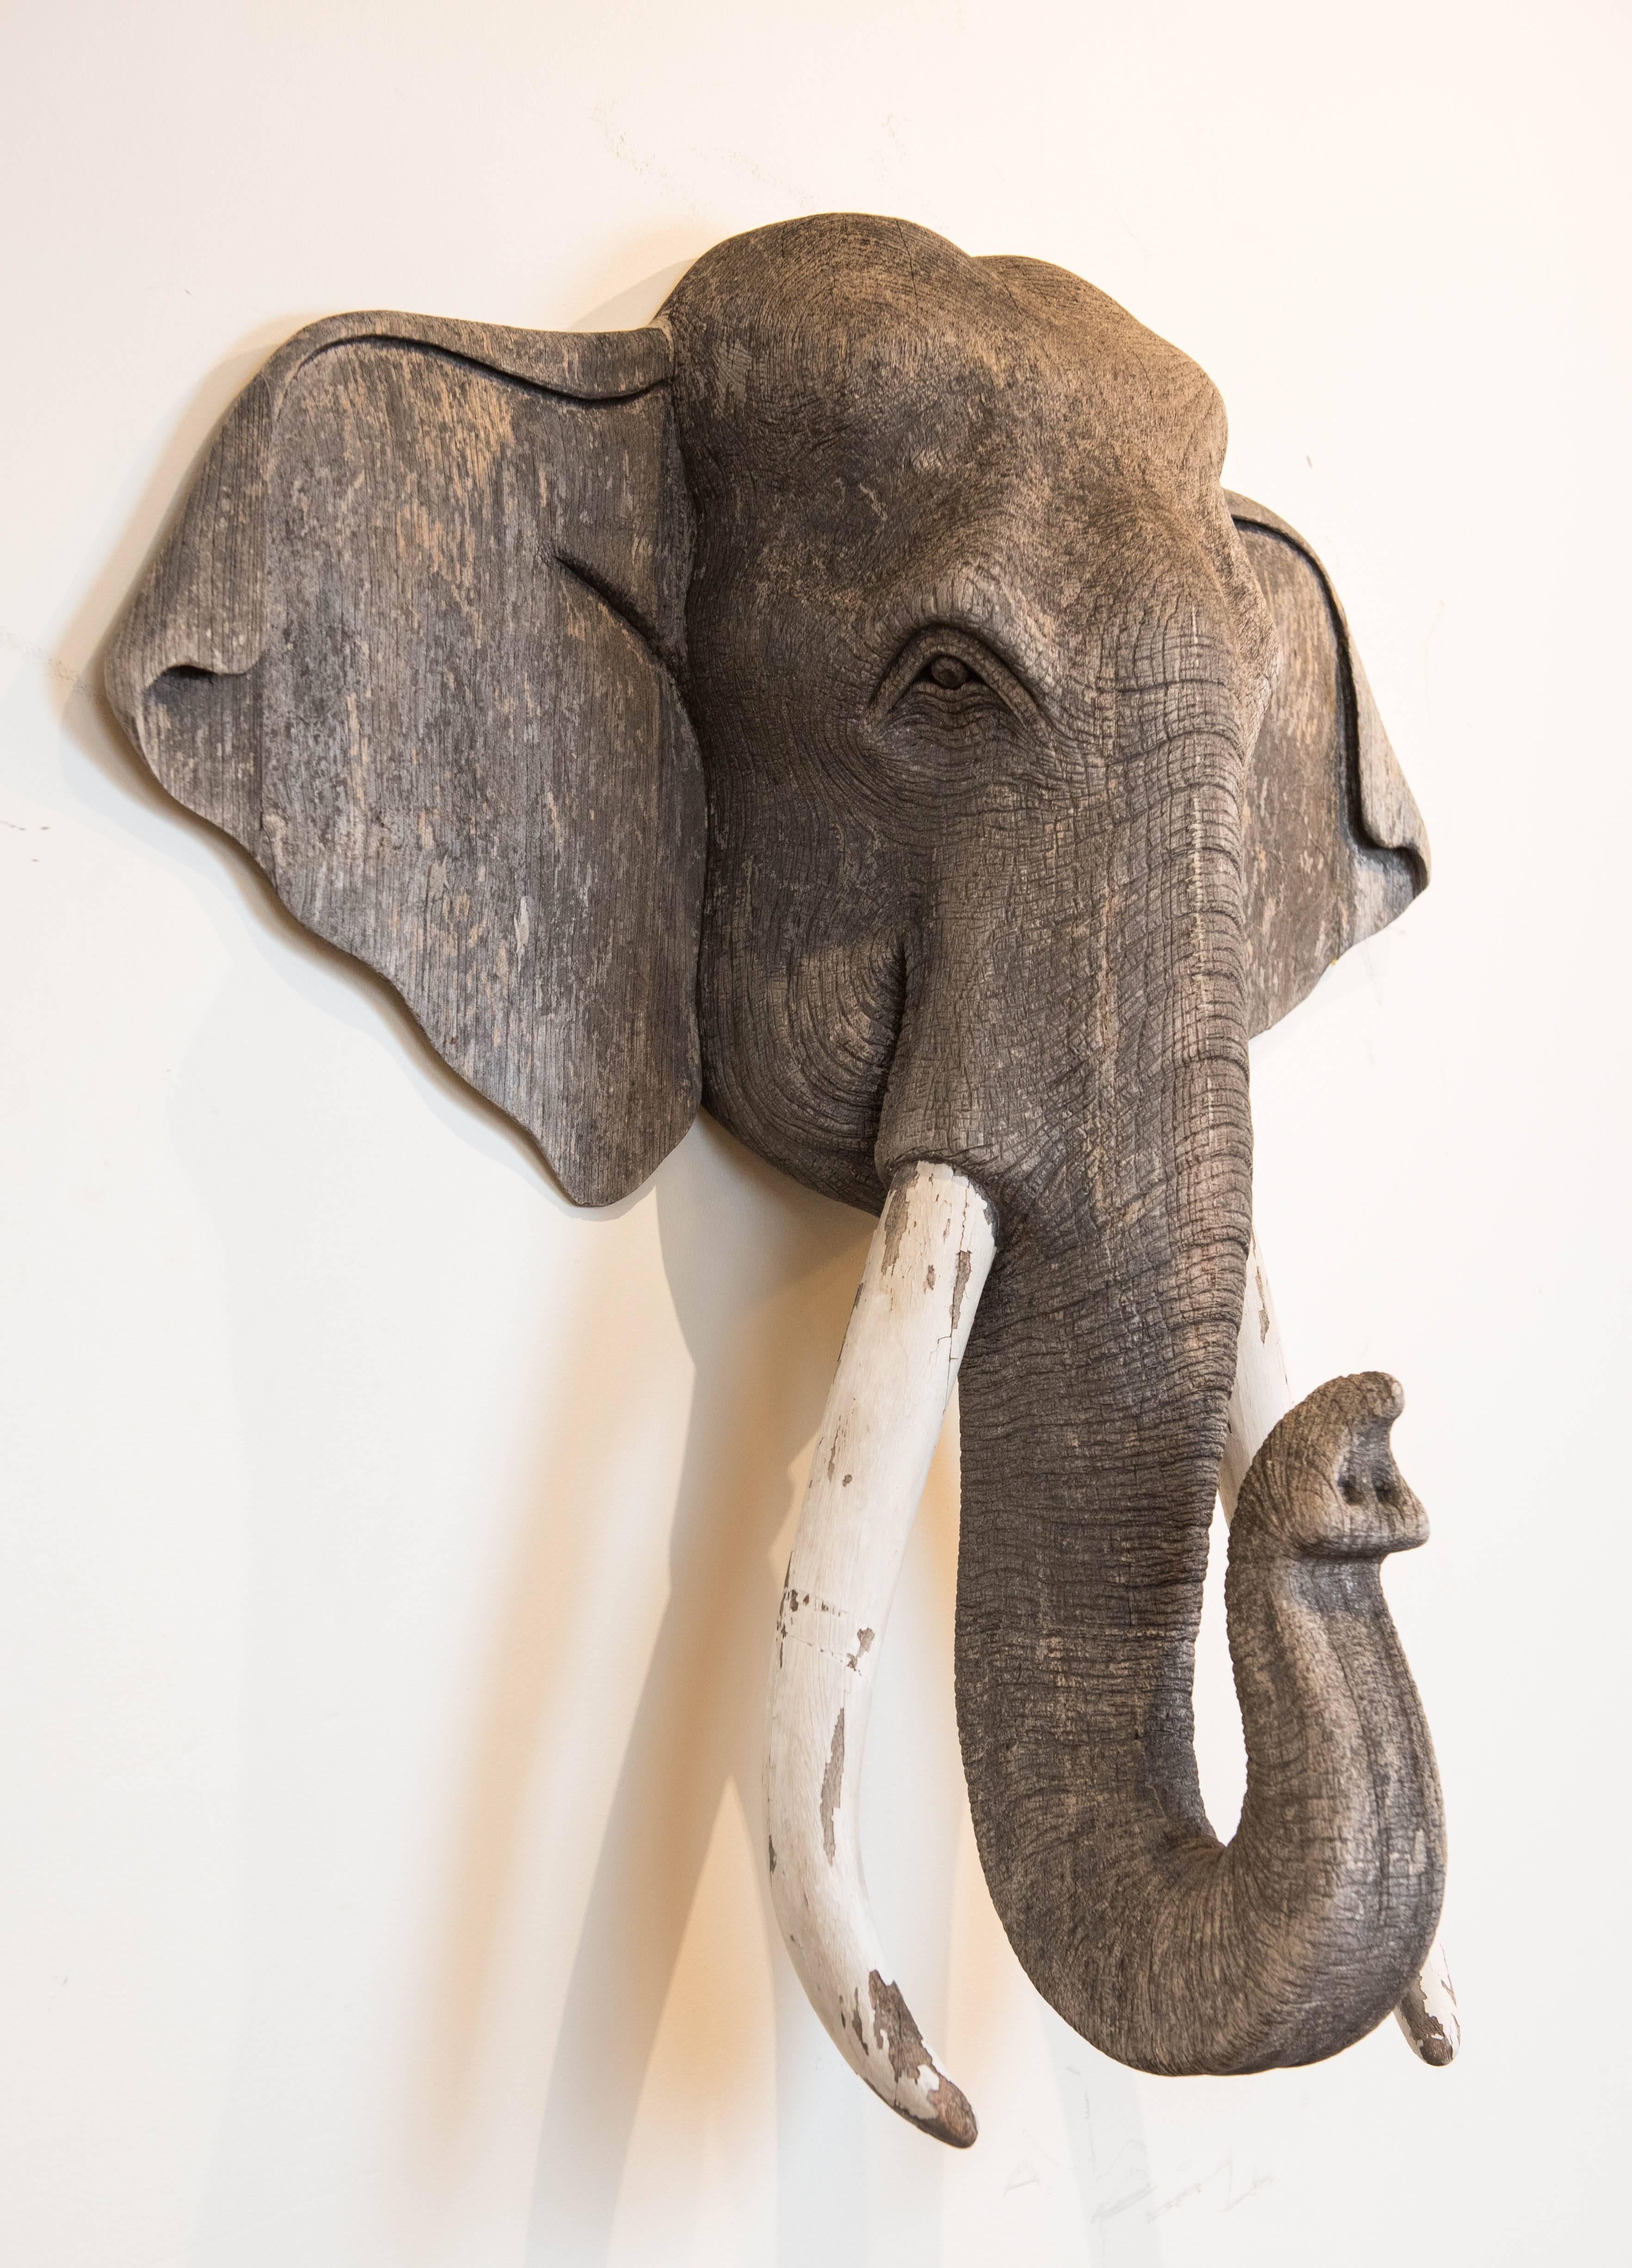 This magnificent wood wall-mounted elephant carving has an authentic weathered patina that only years of outdoor exposure can create. It has a gorgeous grey color and its wood tusks show wear consistent with it's age and exposure. It was brought